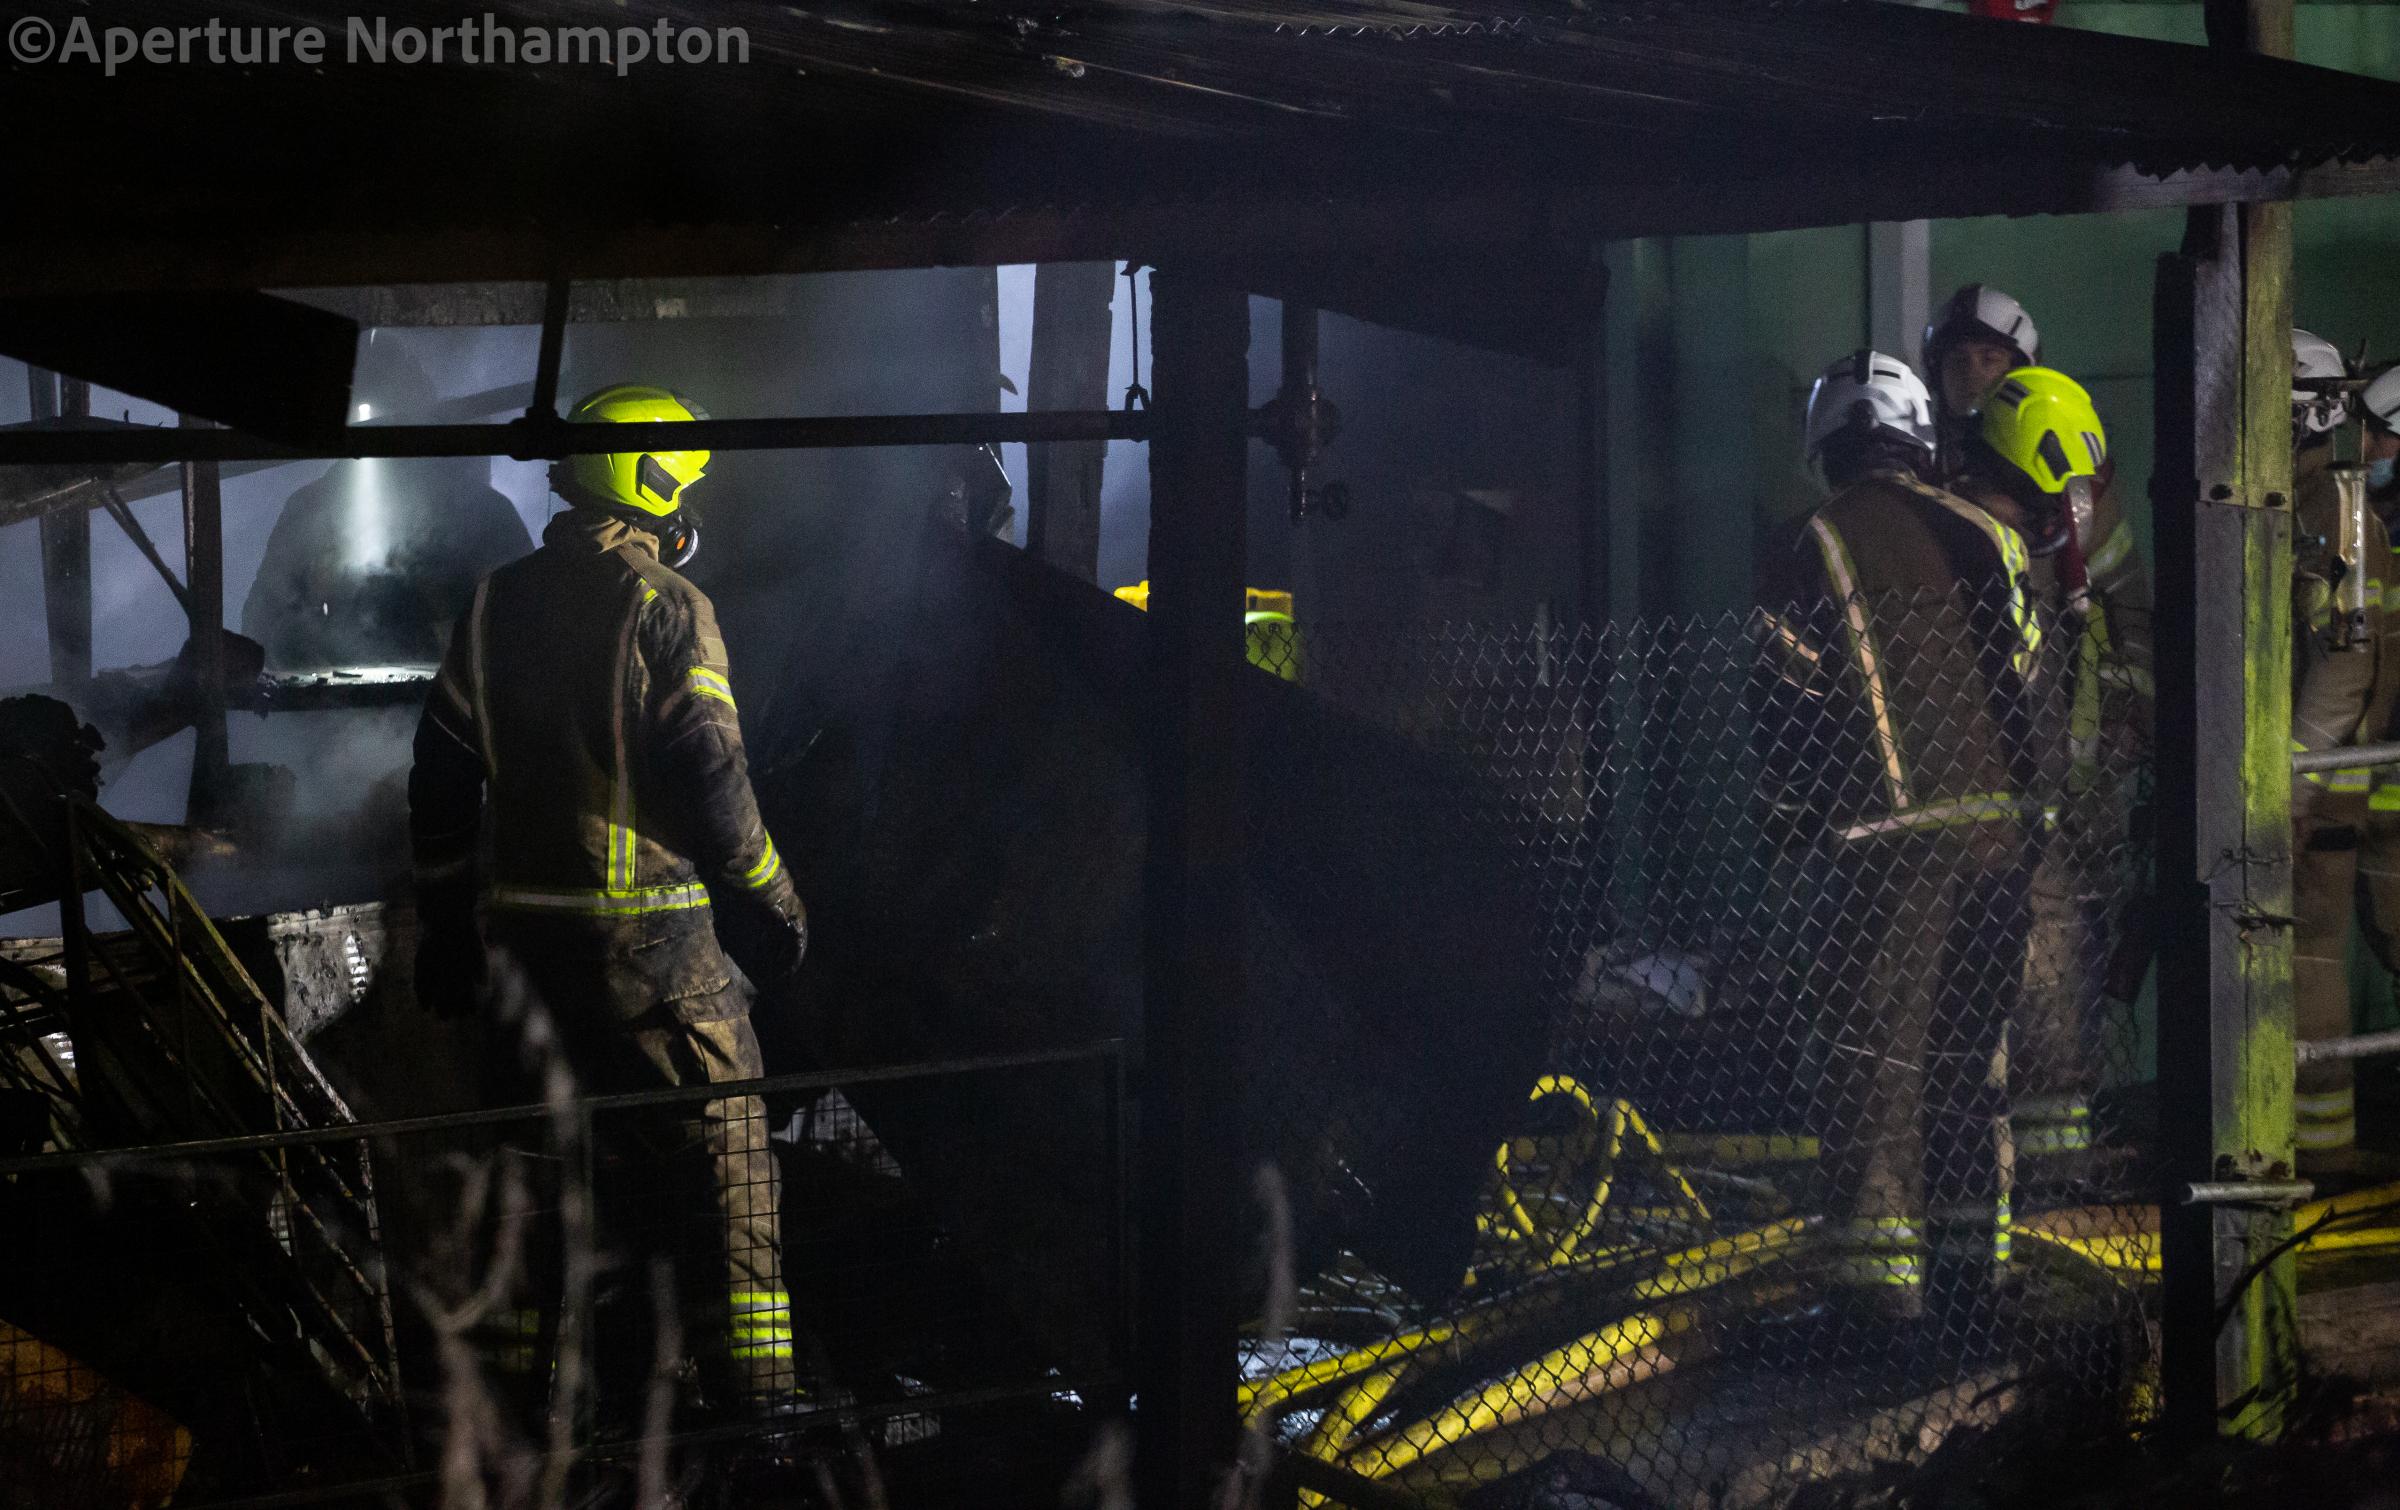 Firefighters tackled the fire by the paper mill Credit: Aperture Northampton News Team